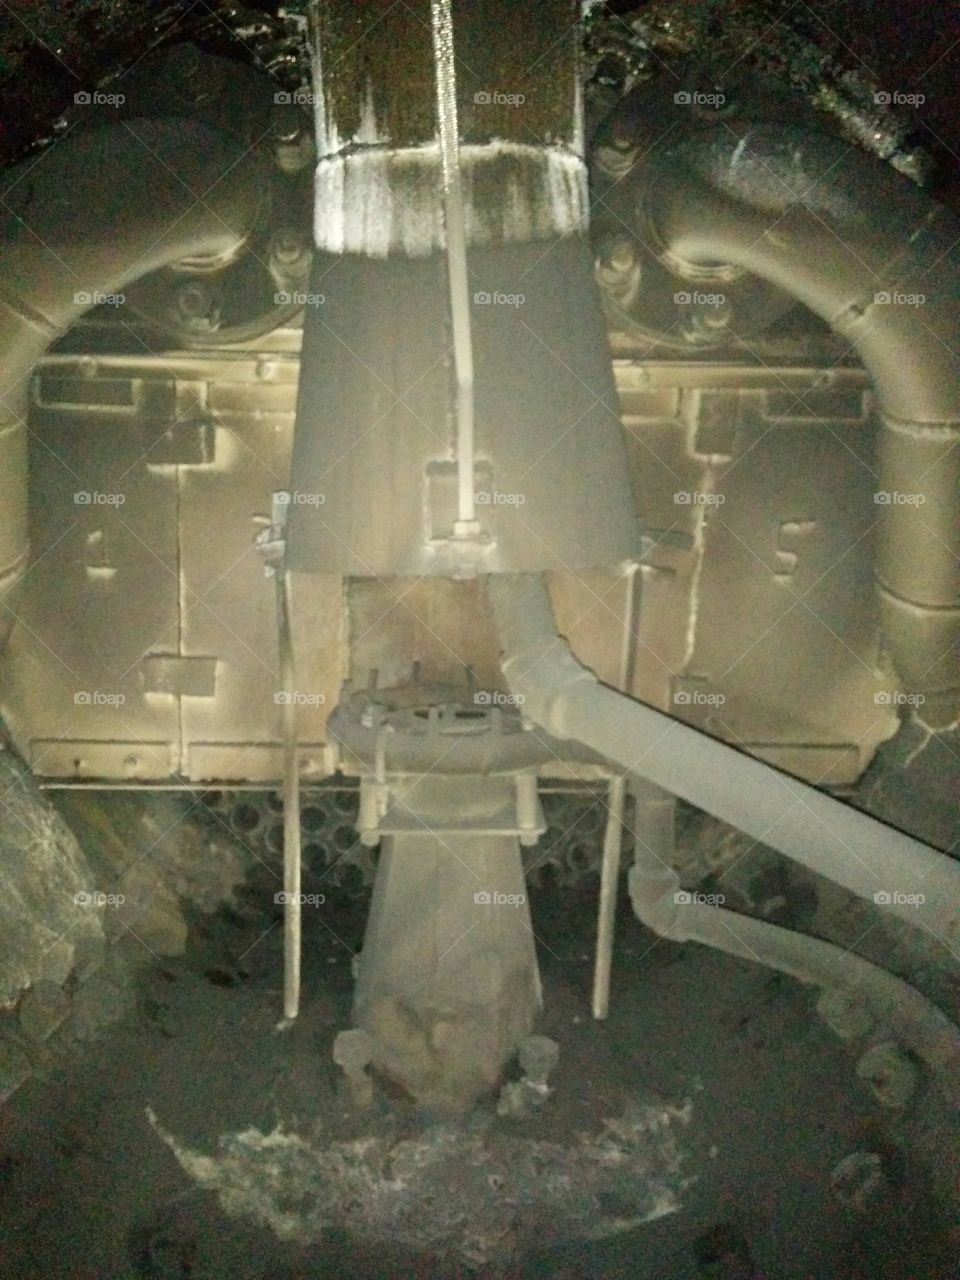 Inside the nose of the steam engine 